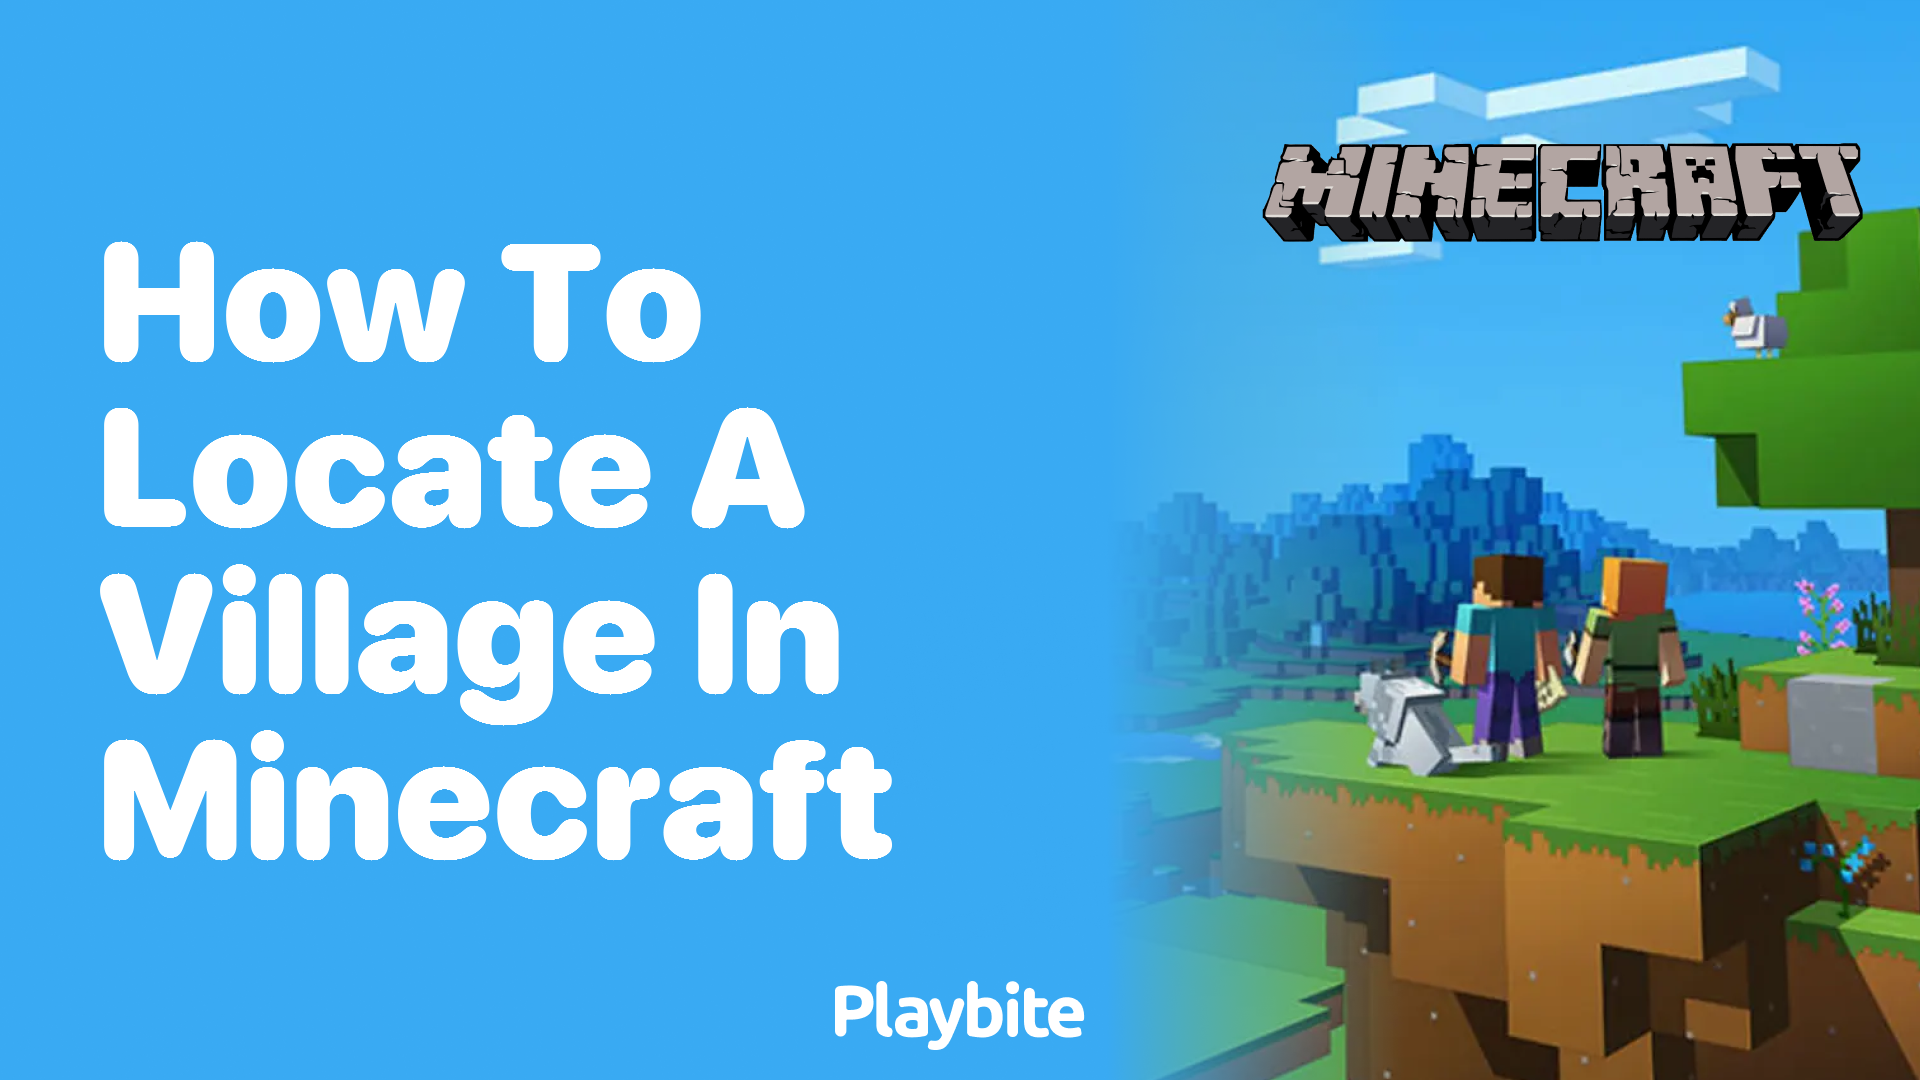 How to locate a village in Minecraft